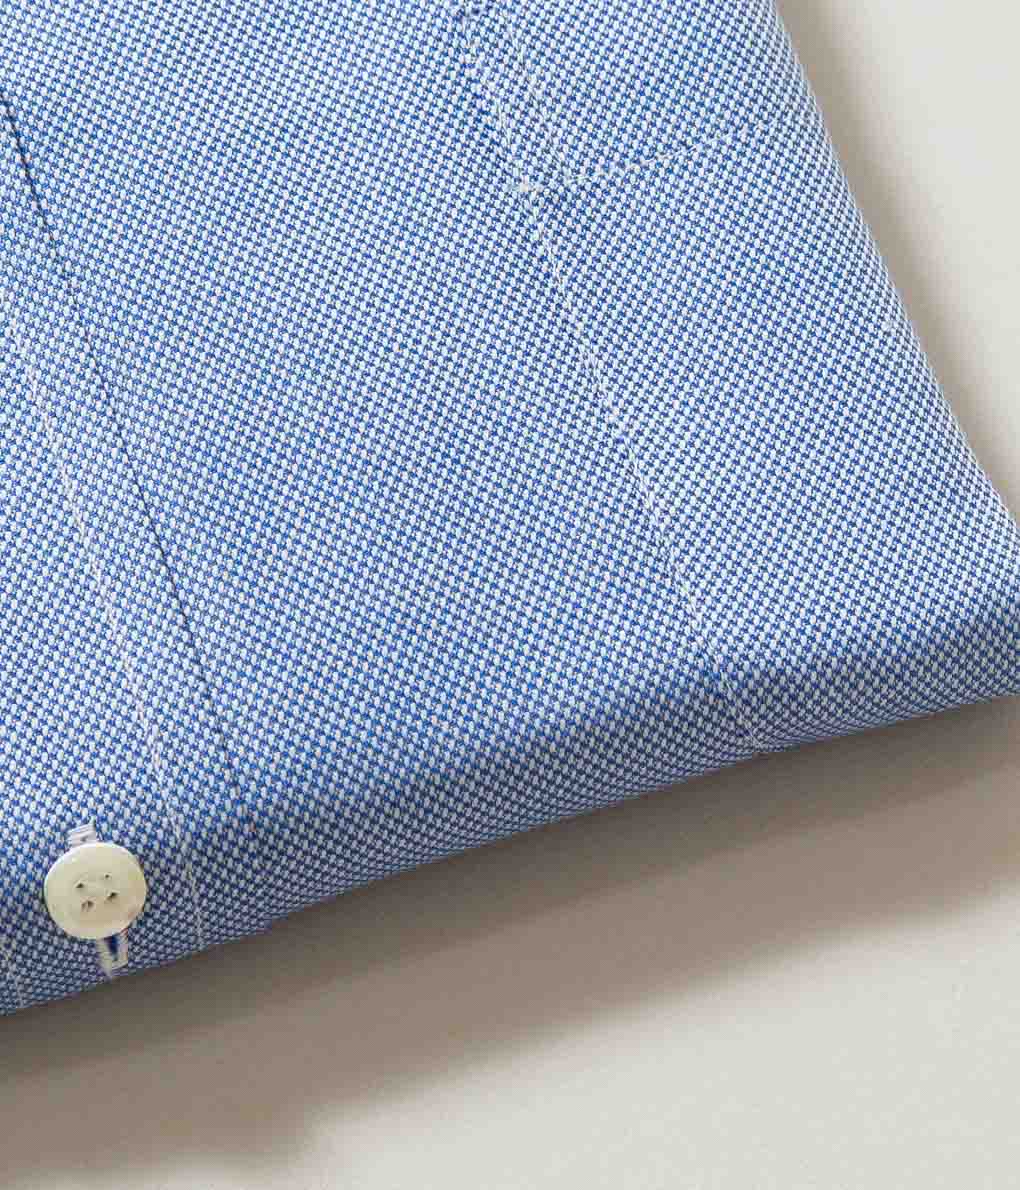 INDIVIDUALIZED SHIRTS "ROYAL OXFORD (STANDARD FIT BUTTON DOWN SHIRT)" (BLUE)